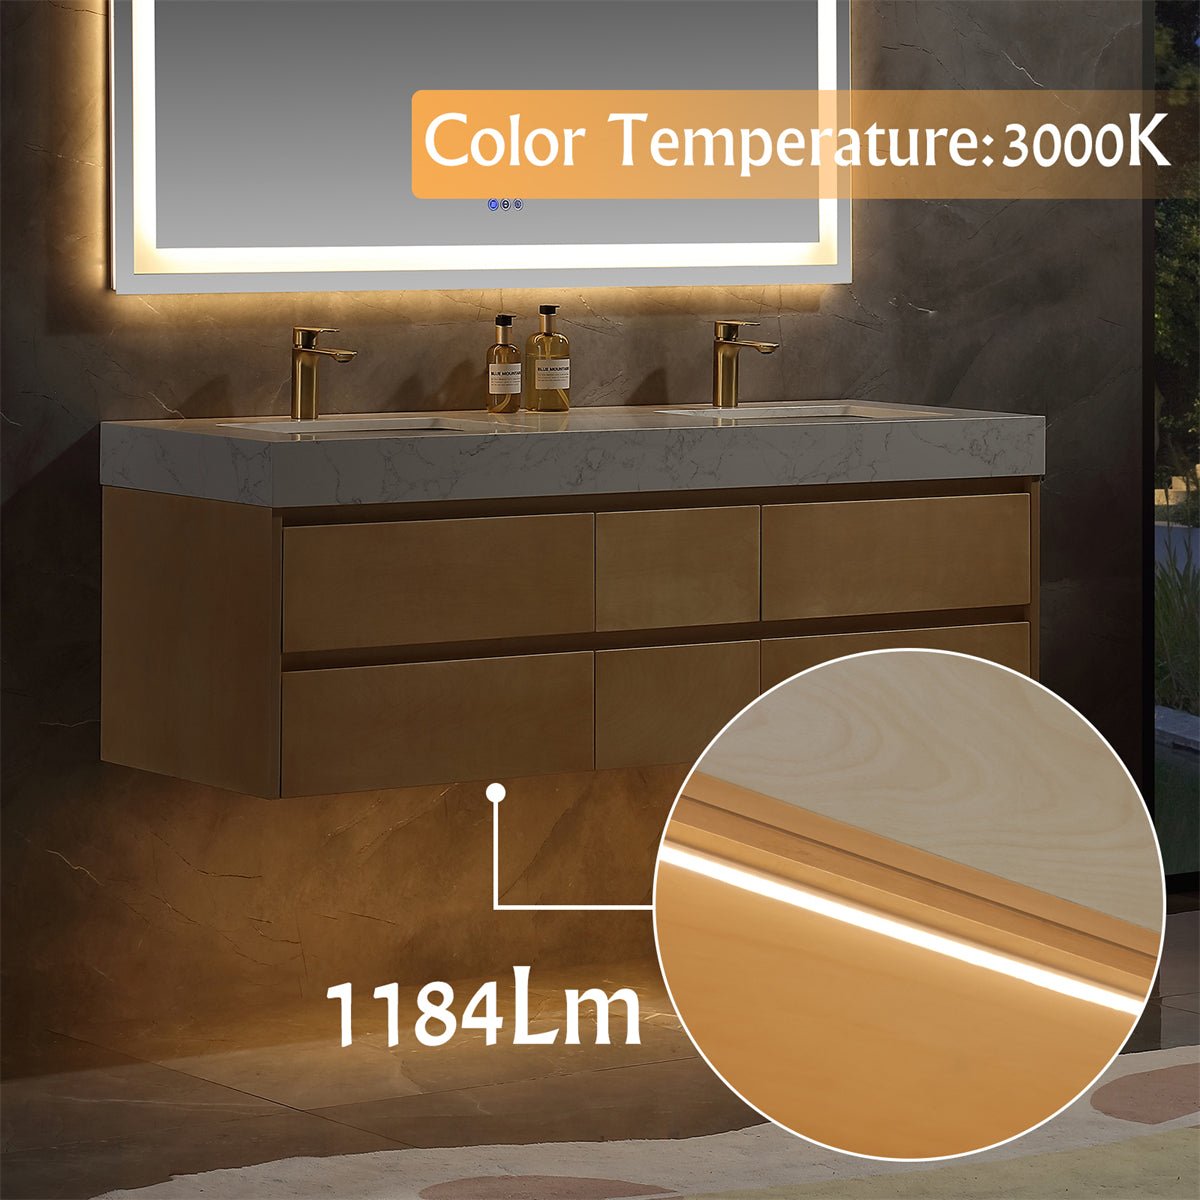 Sleek 60" Modern Floating Maple wood Bathroom Vanity Cabinet with with Lights and Stone Slab Countertop